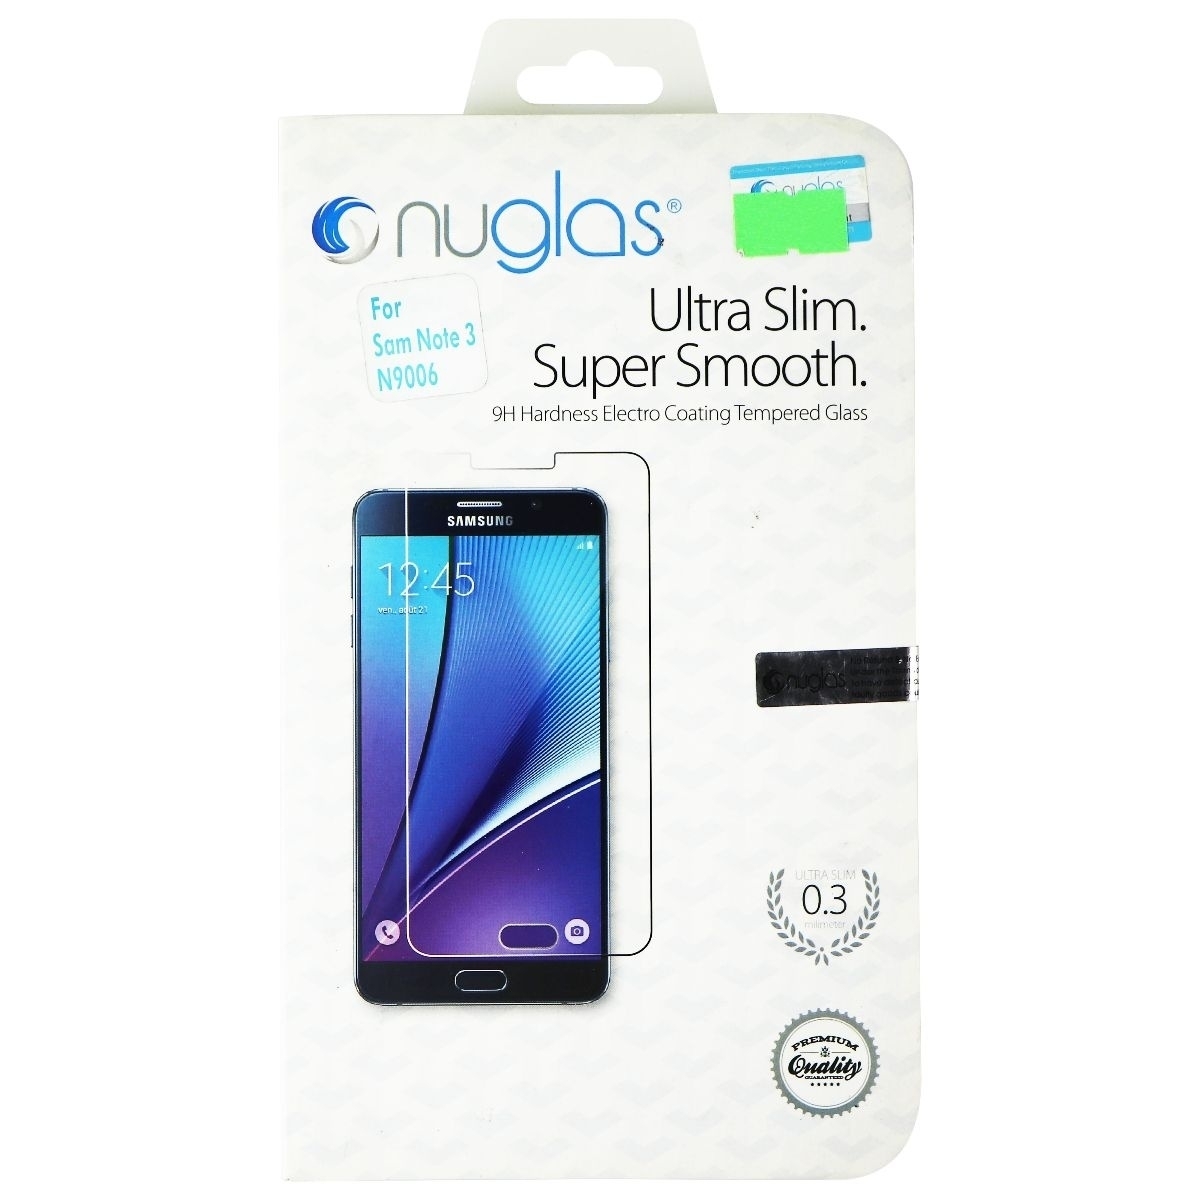 NuGlas Tempered Glass Screen Protector For Samsung Note 3 - Clear